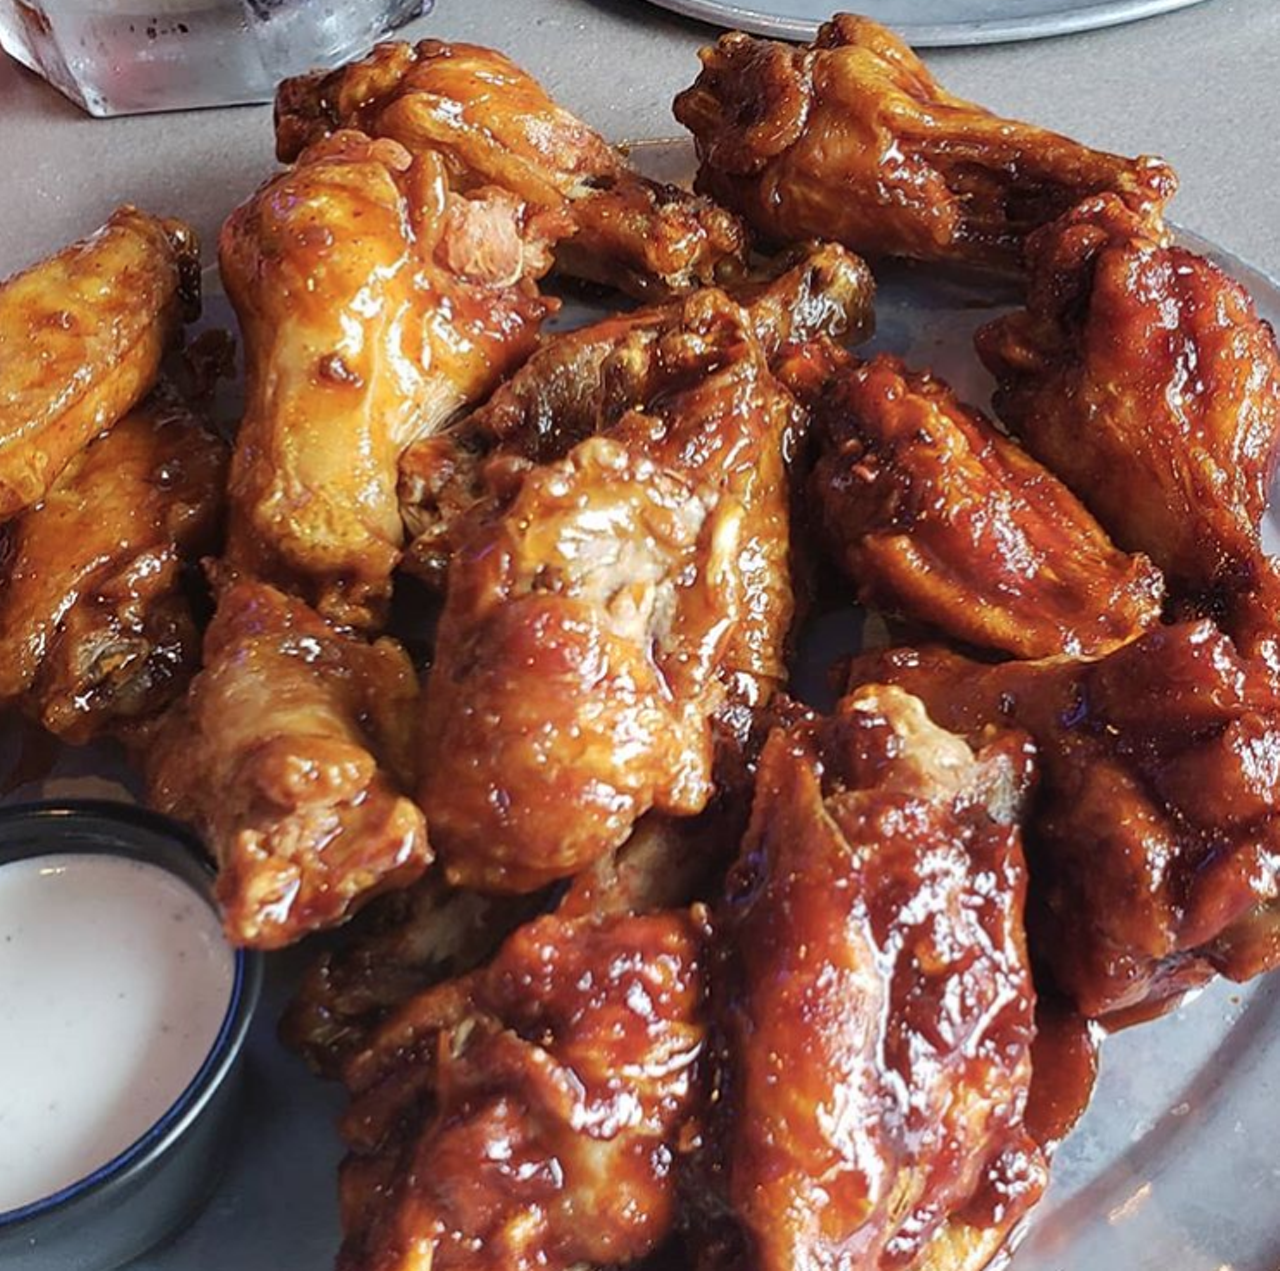 Pluckers finally coming to San Antonio
Whether you choose to be a chicken wing, or a piece of Holy Macaroni, you foodies should just give this one a thought. Superfans will totally get what you’re going for, but maybe you can print out the logo and slap it on your chest to be sure.
Photo via Instagram / culturesa210